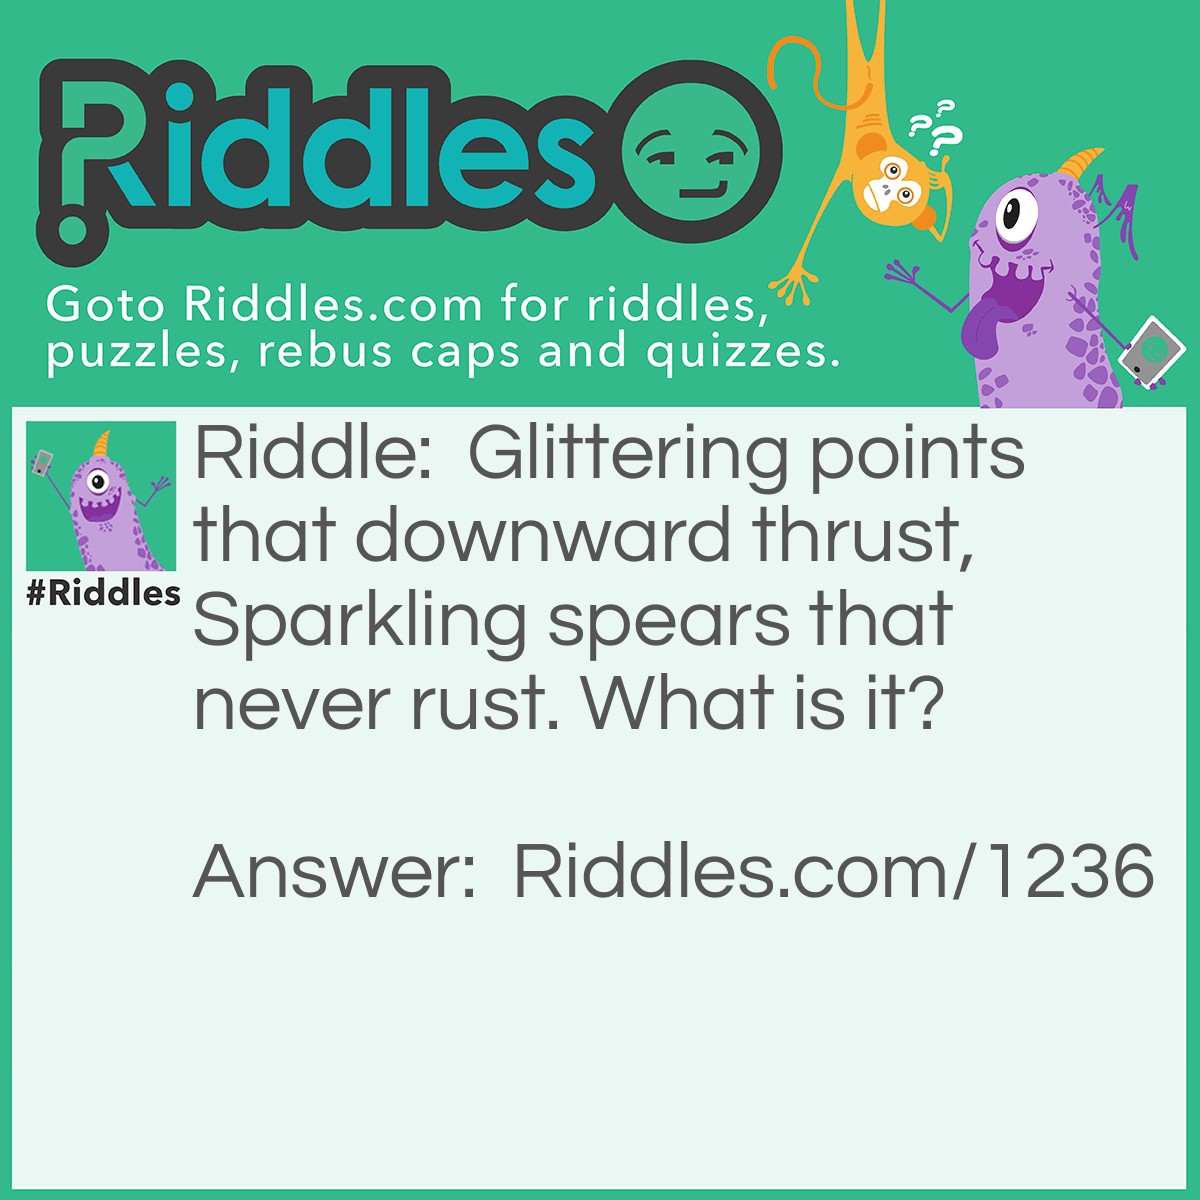 Riddle: Glittering points that downward thrust, Sparkling spears that never rust. What is it? Answer: An icicle.